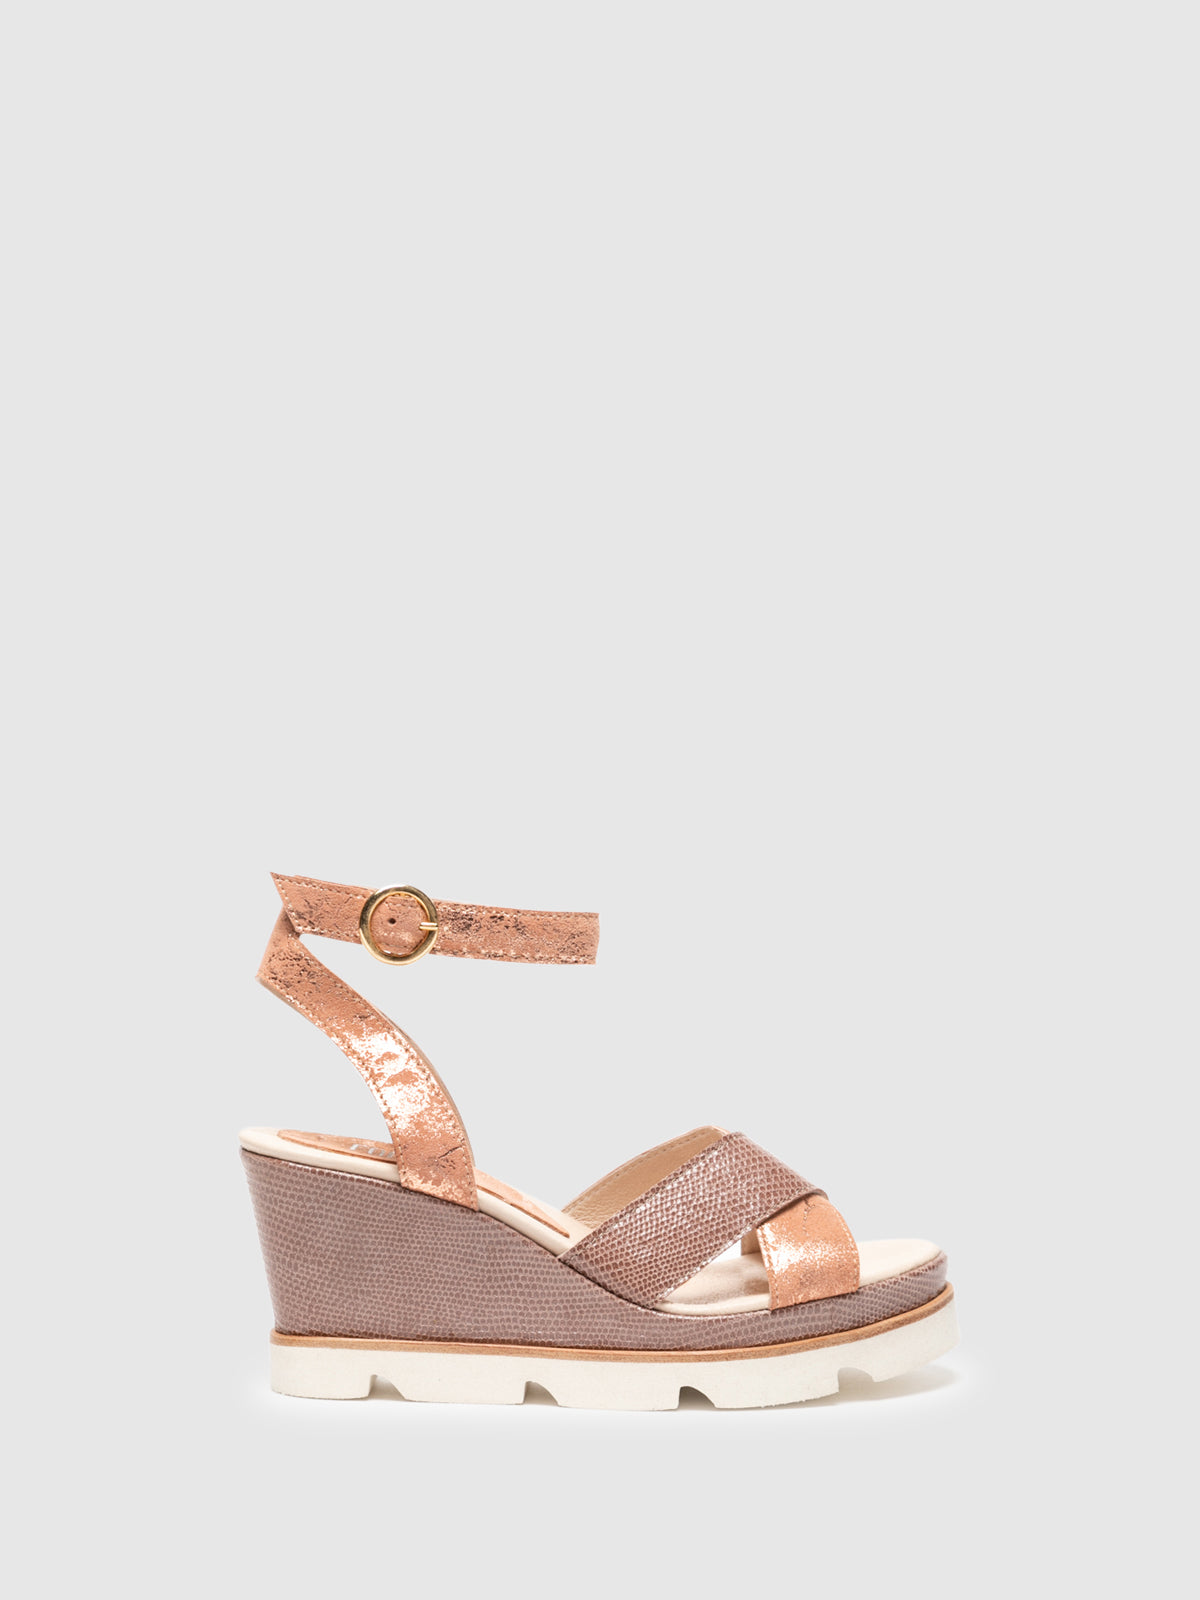 Foreva Pink Wedge Sandals